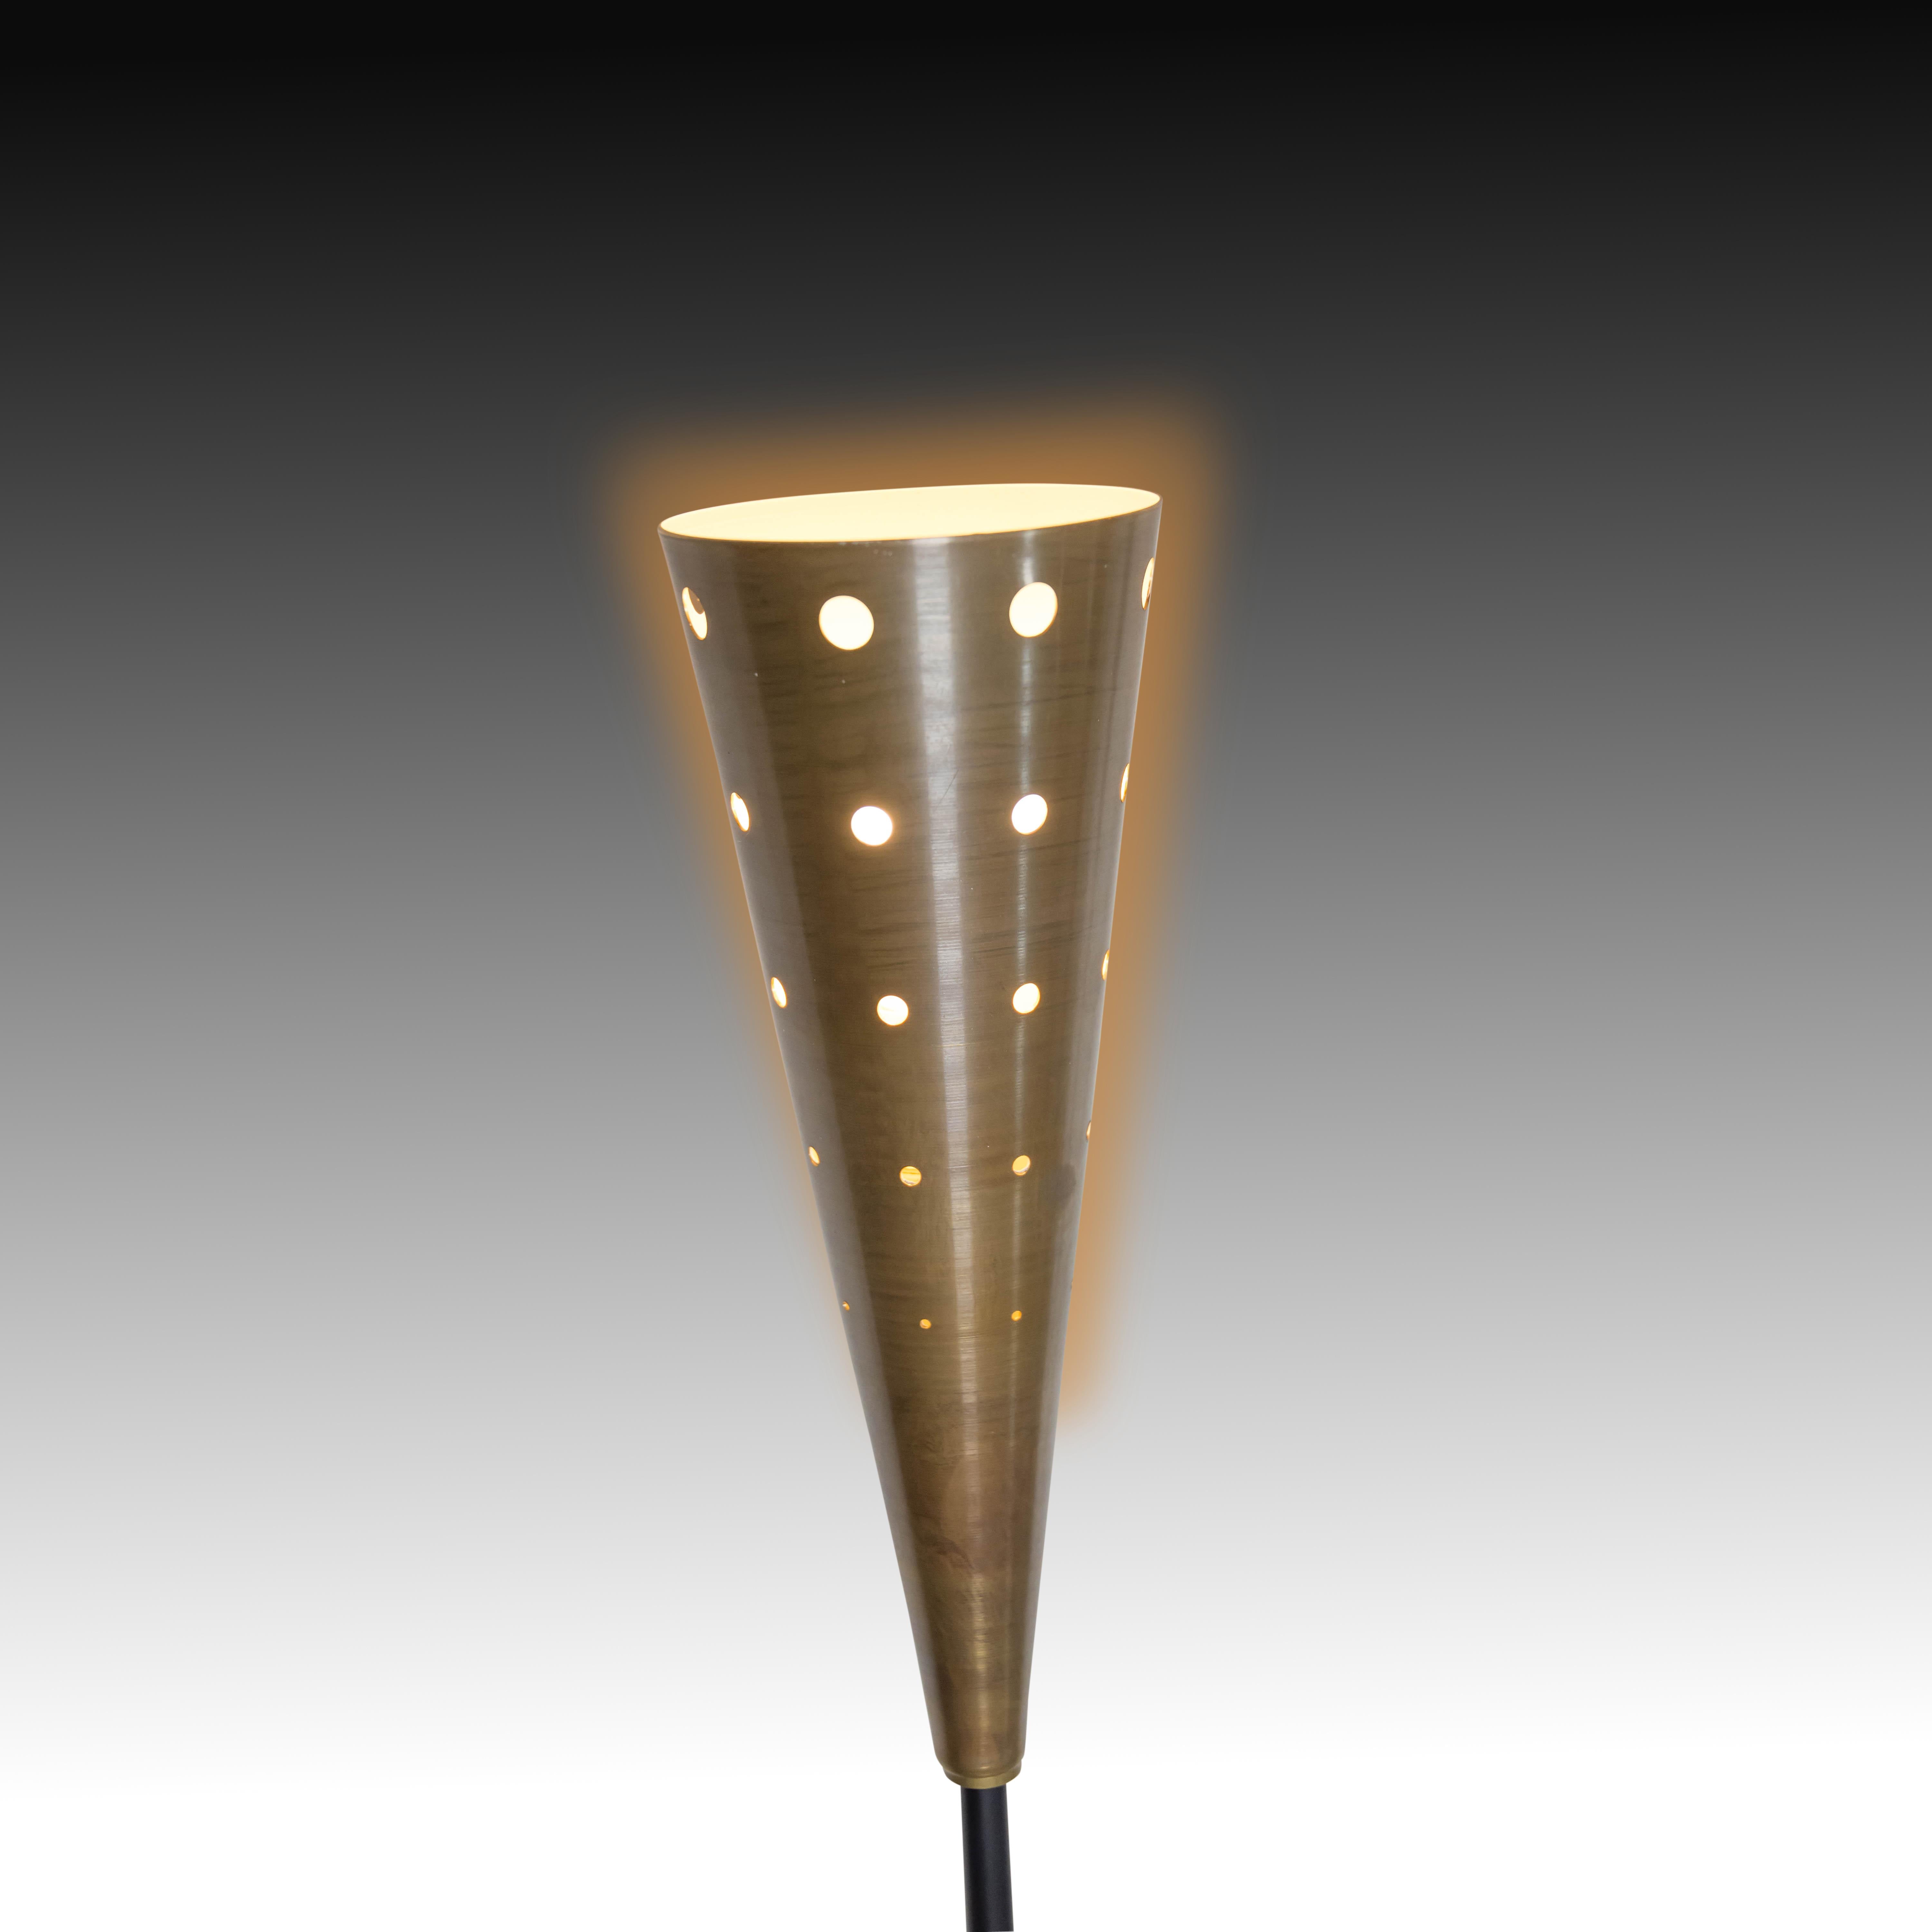 Mid-20th Century 1950s Italian Design Floor Lamp Brass Structure and Shades Attributed to Stilux